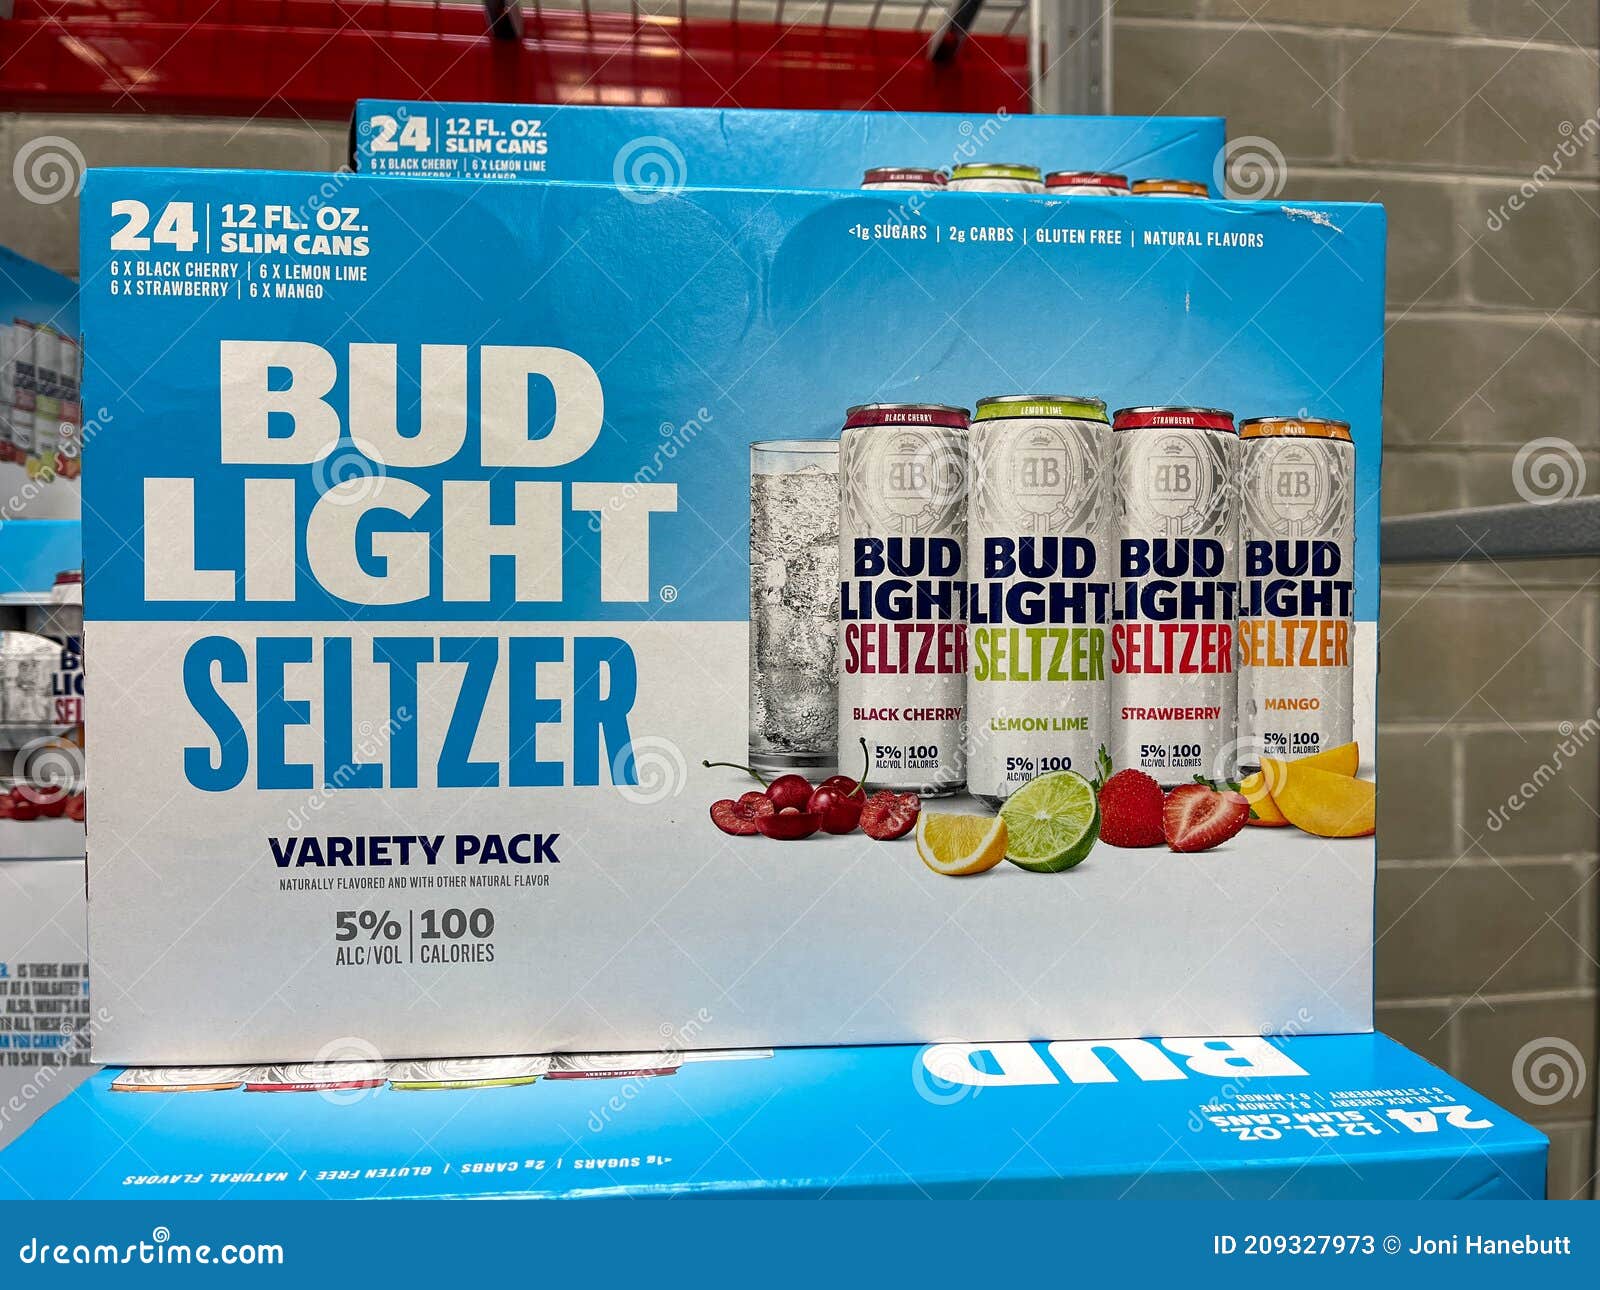 cases-of-bud-light-hard-seltzer-alcohol-beverages-at-a-sams-club-store